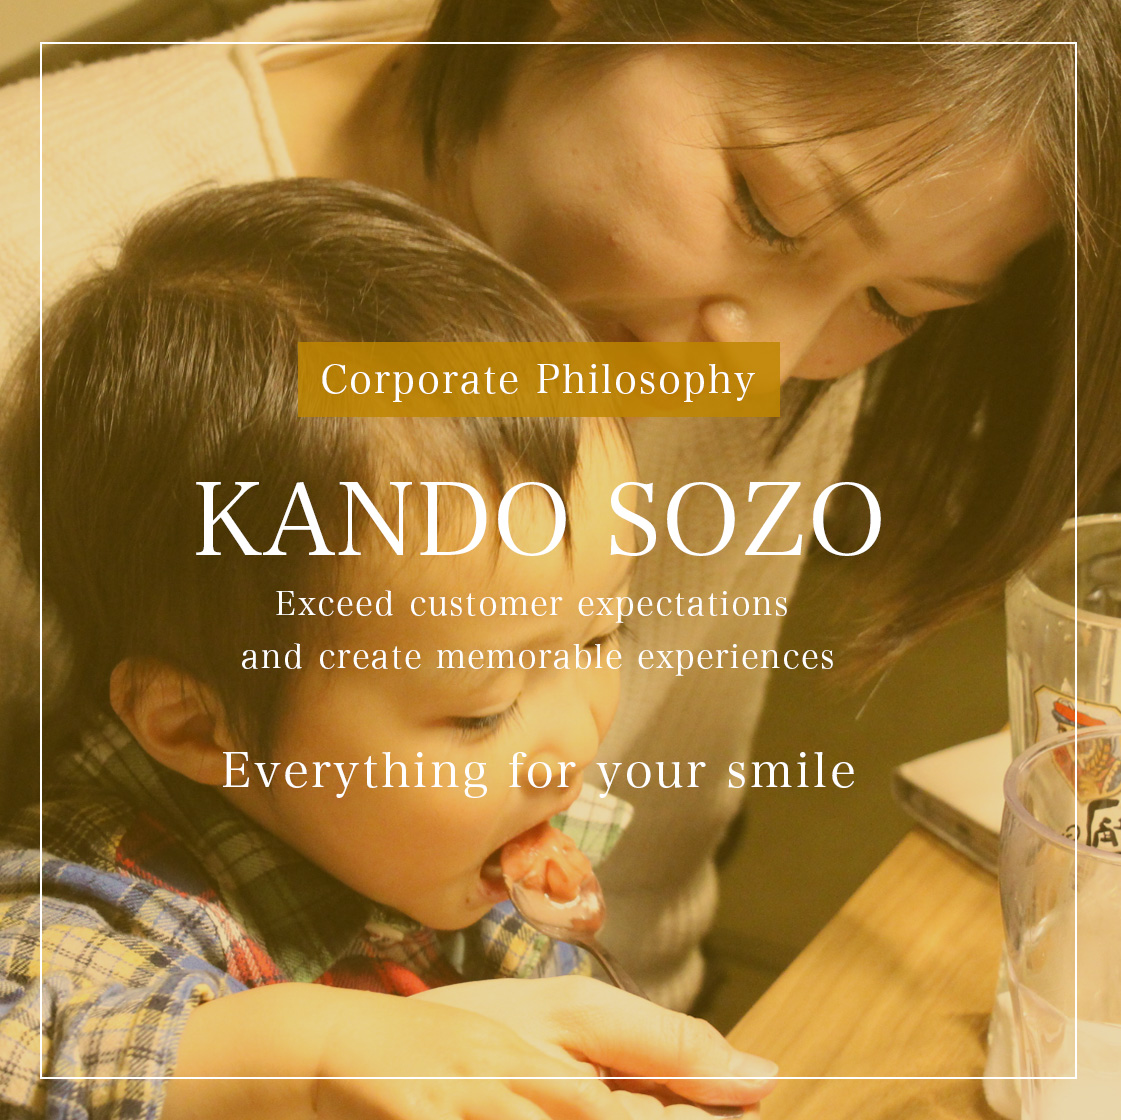 Corporate Philosophy KANDO SOZO Exceed customer expectations and create memorable experiences